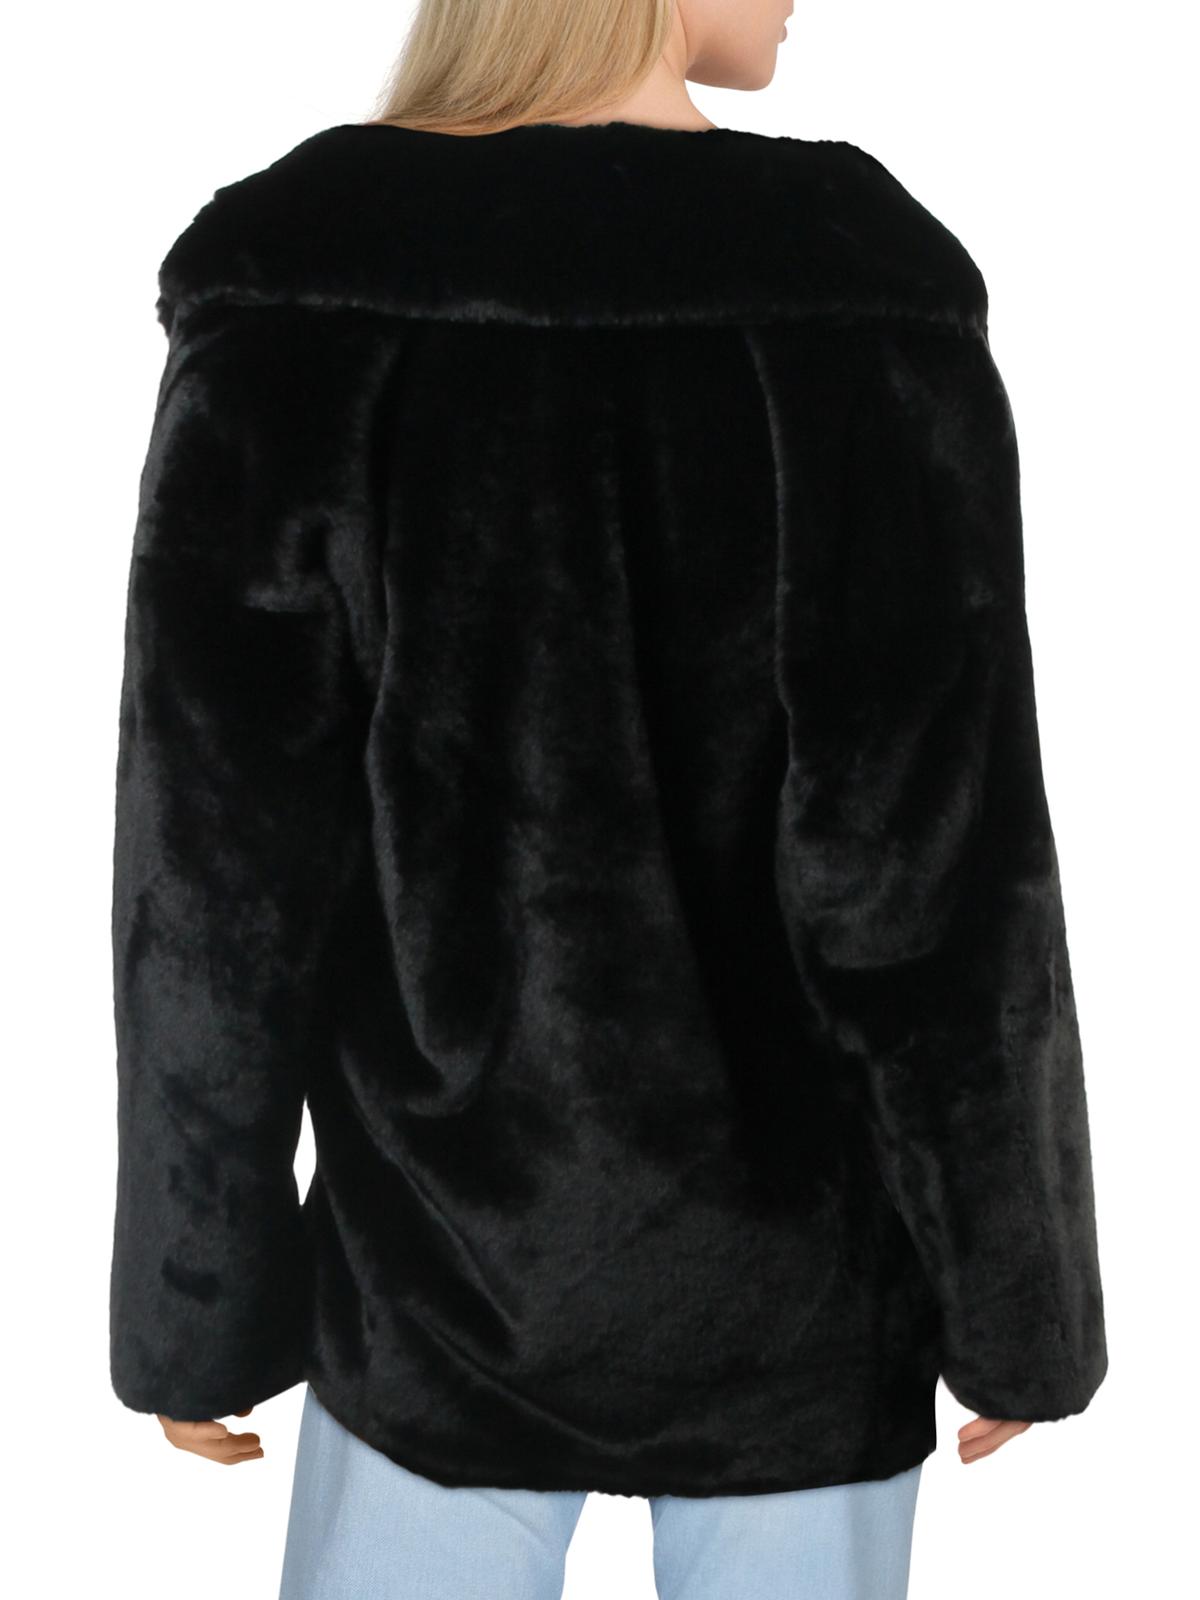 Free People Womens Kate Winter Double-Breasted Faux Fur Coat Black S - image 2 of 2